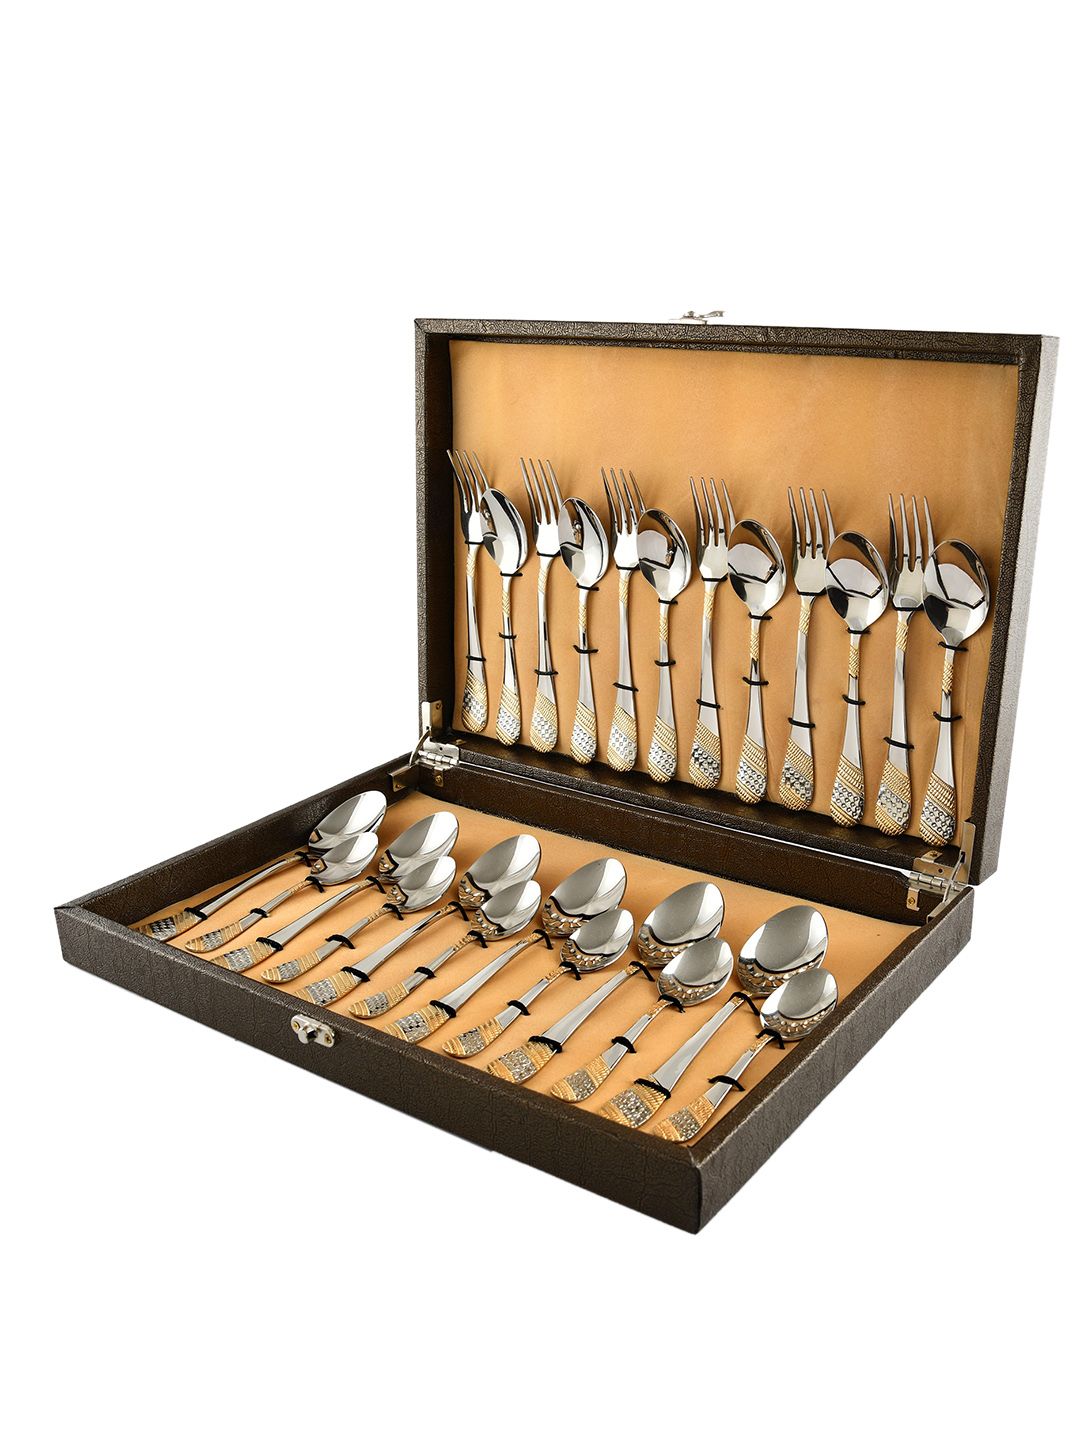 FNS Imperio 24 Karat Gold Plated 24 Pc Cutlery Set with Leatherette Box Price in India